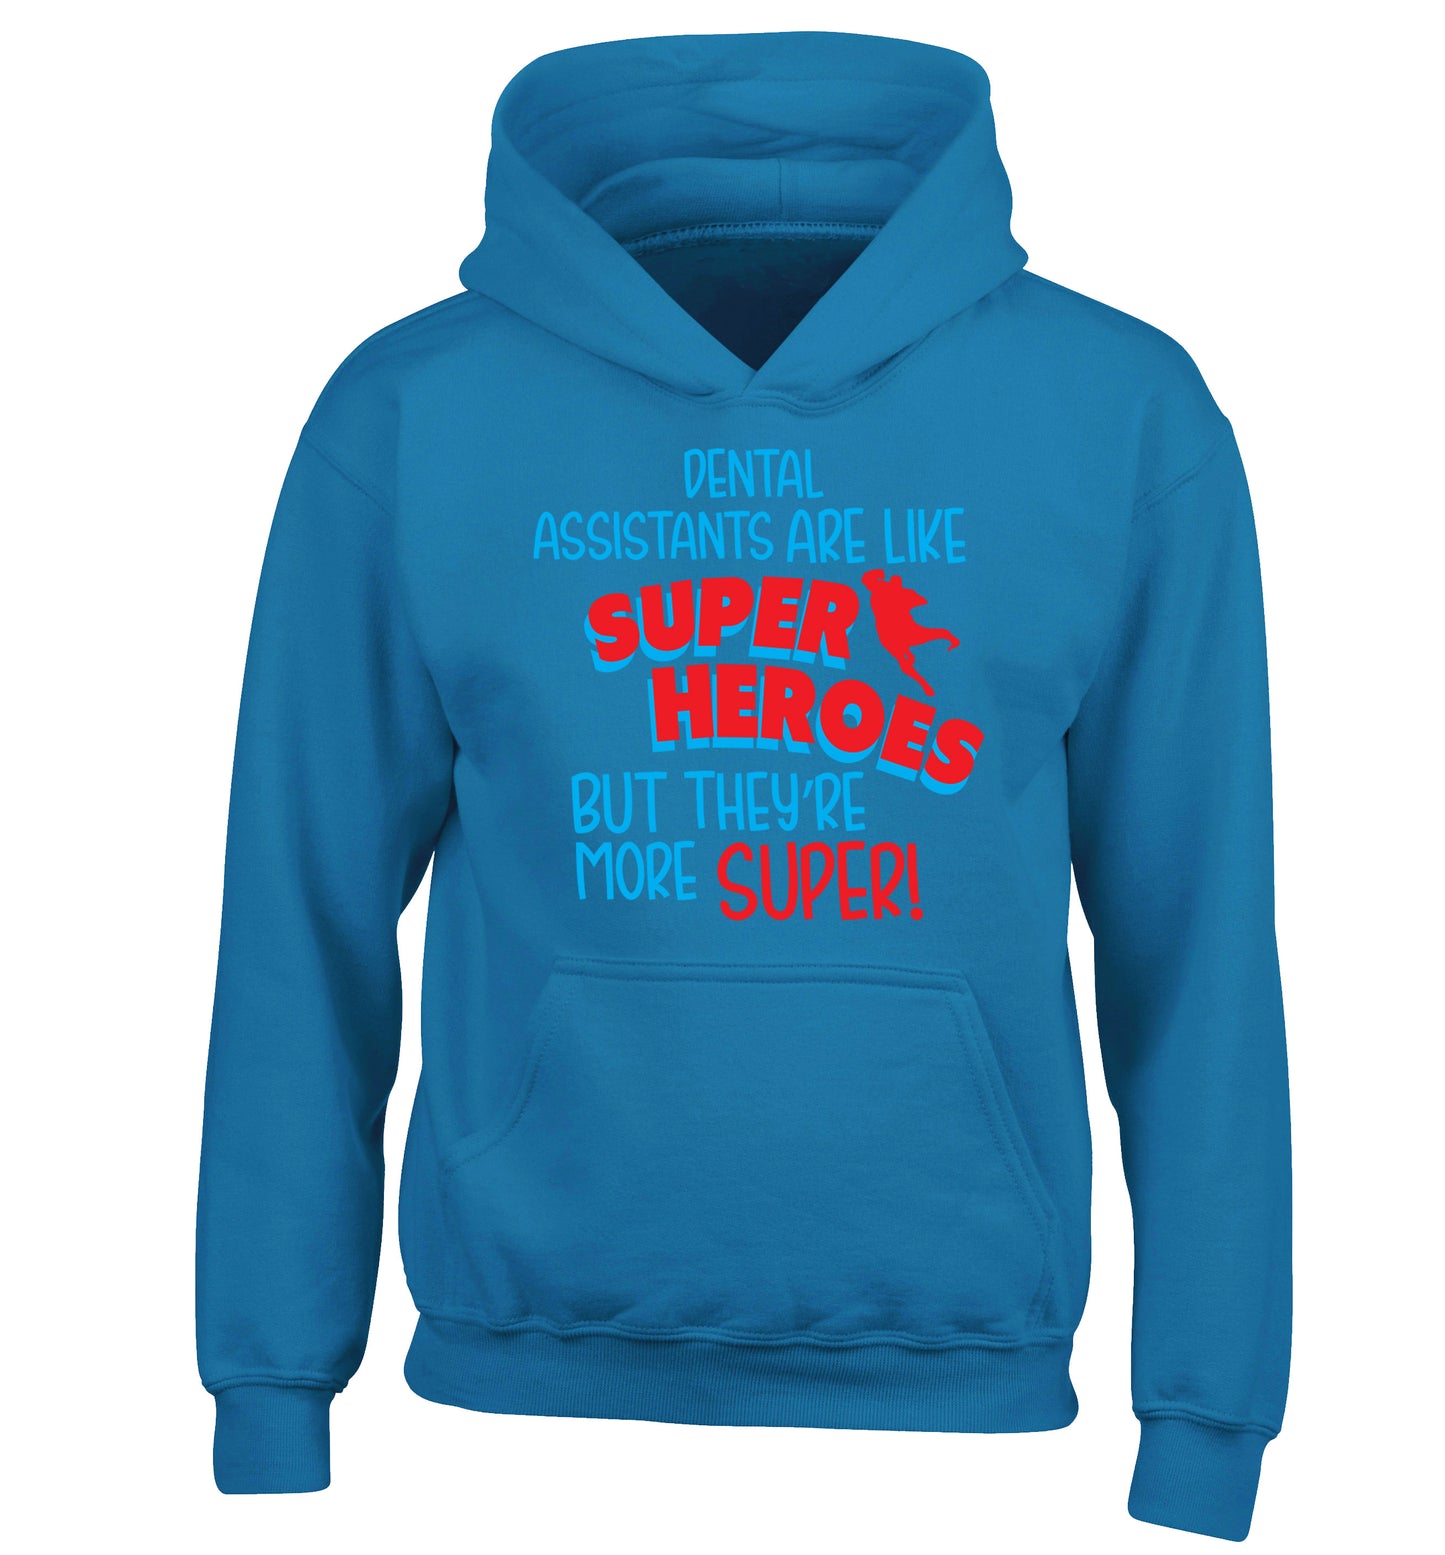 Dental Assistants are like superheros but they're more super children's blue hoodie 12-13 Years